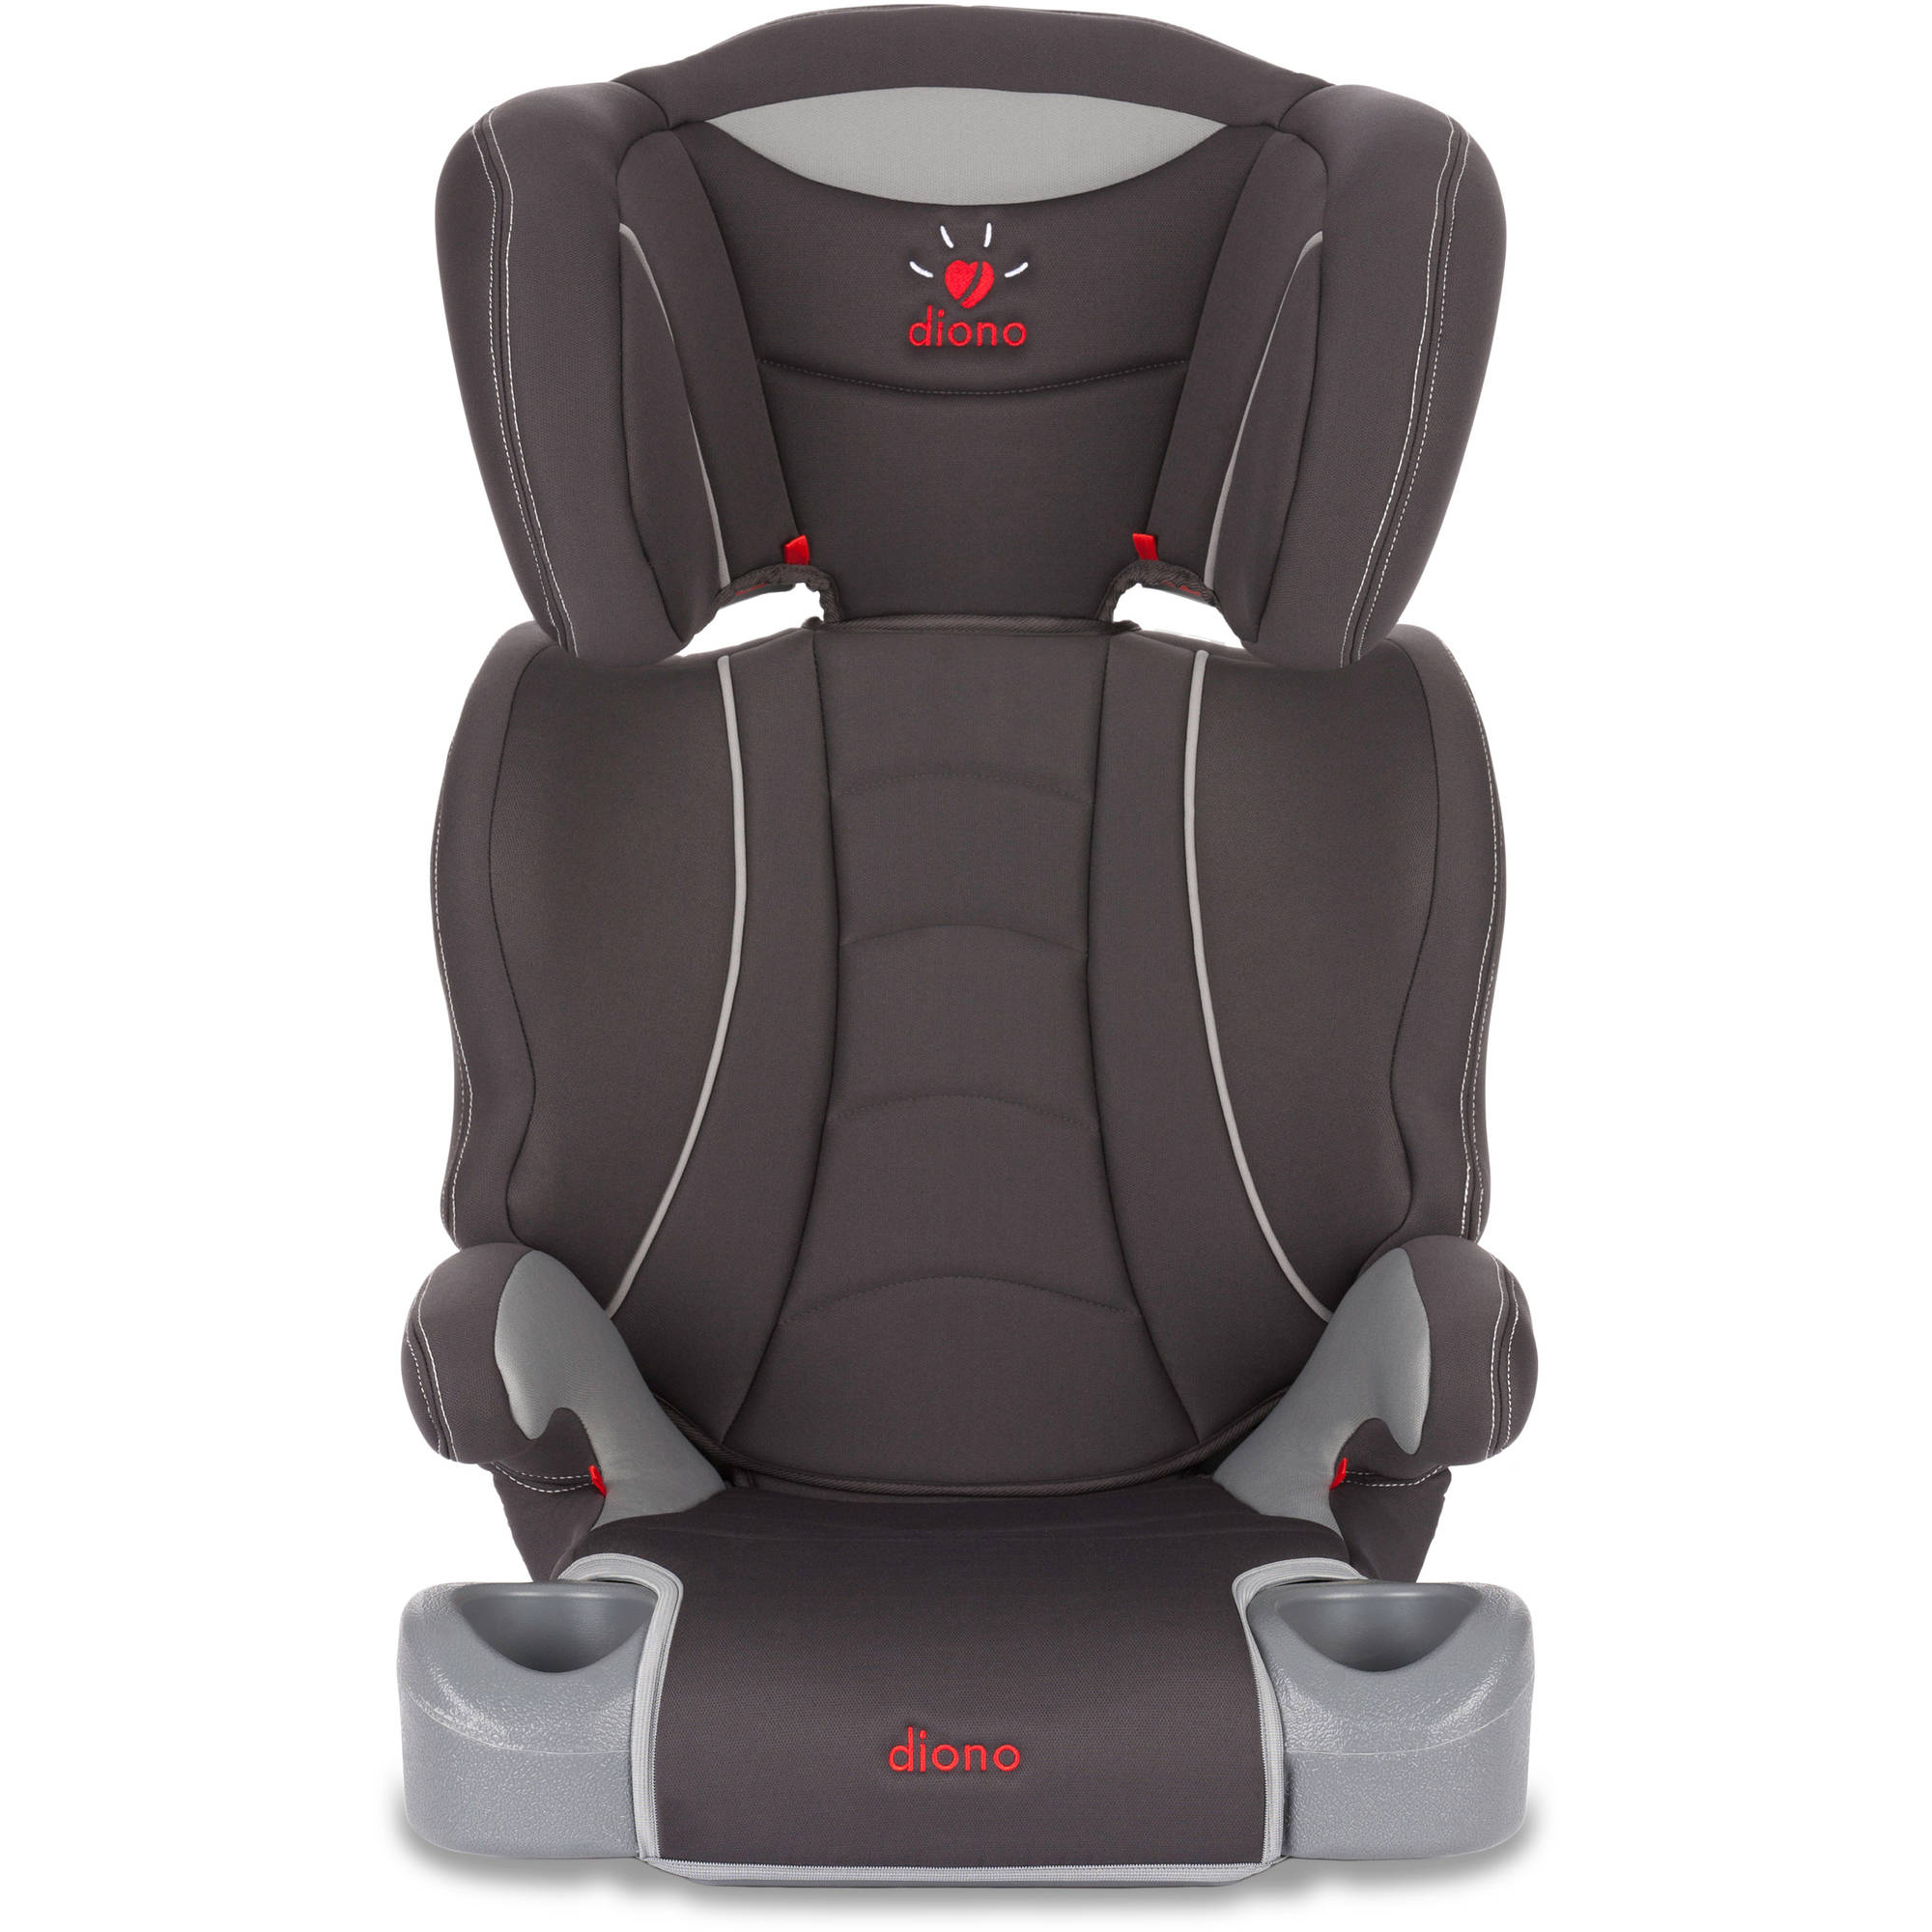 diono hip high back booster car seat with cup holders, slate - image 2 of 4